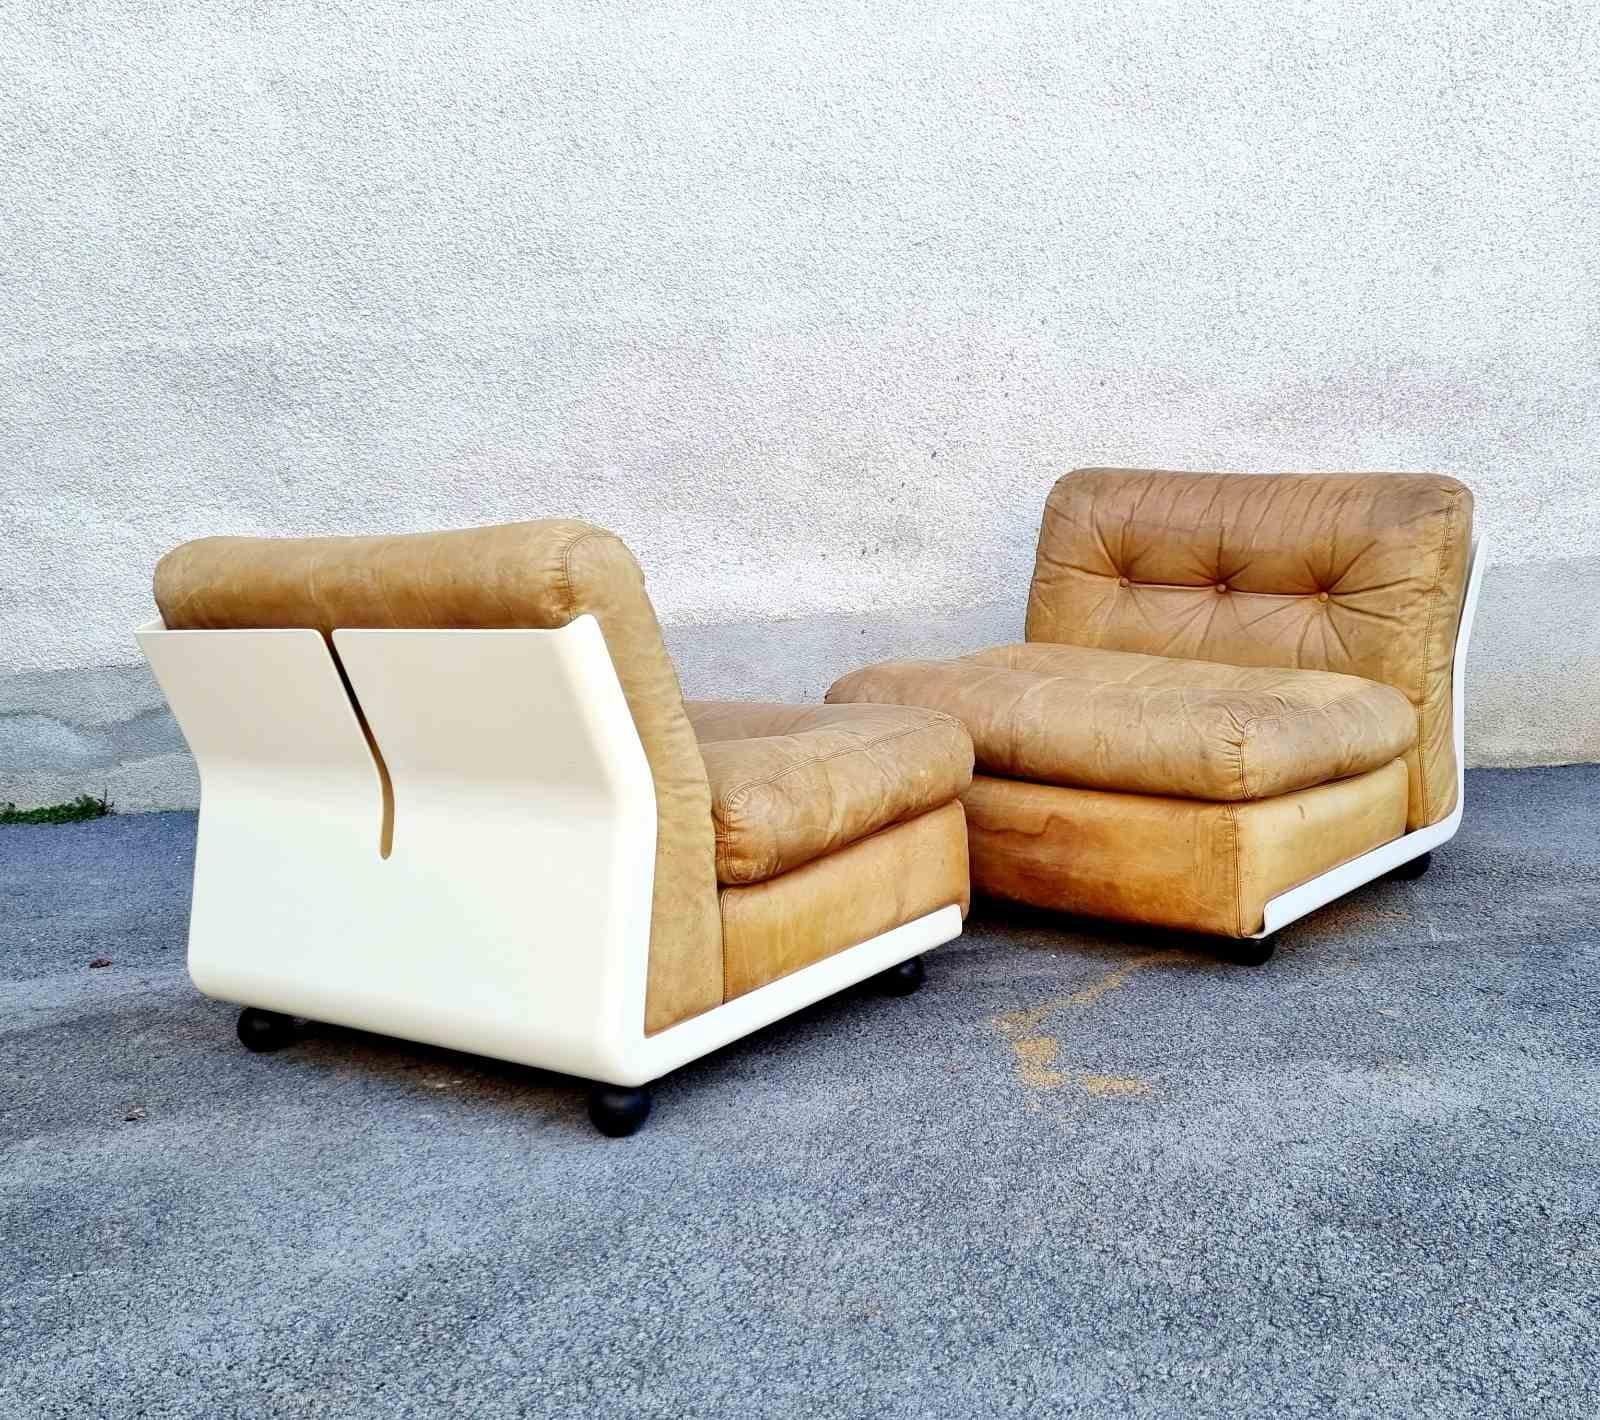 A pair of 'Amanta' leather and fiberglass lounge chairs, originally designed in Italy by Mario Bellini for C&B Italia in 1966. The design was extremely popular and in great demand, with a waitlist for eager purchasers. The 'Amanta' was produced as a